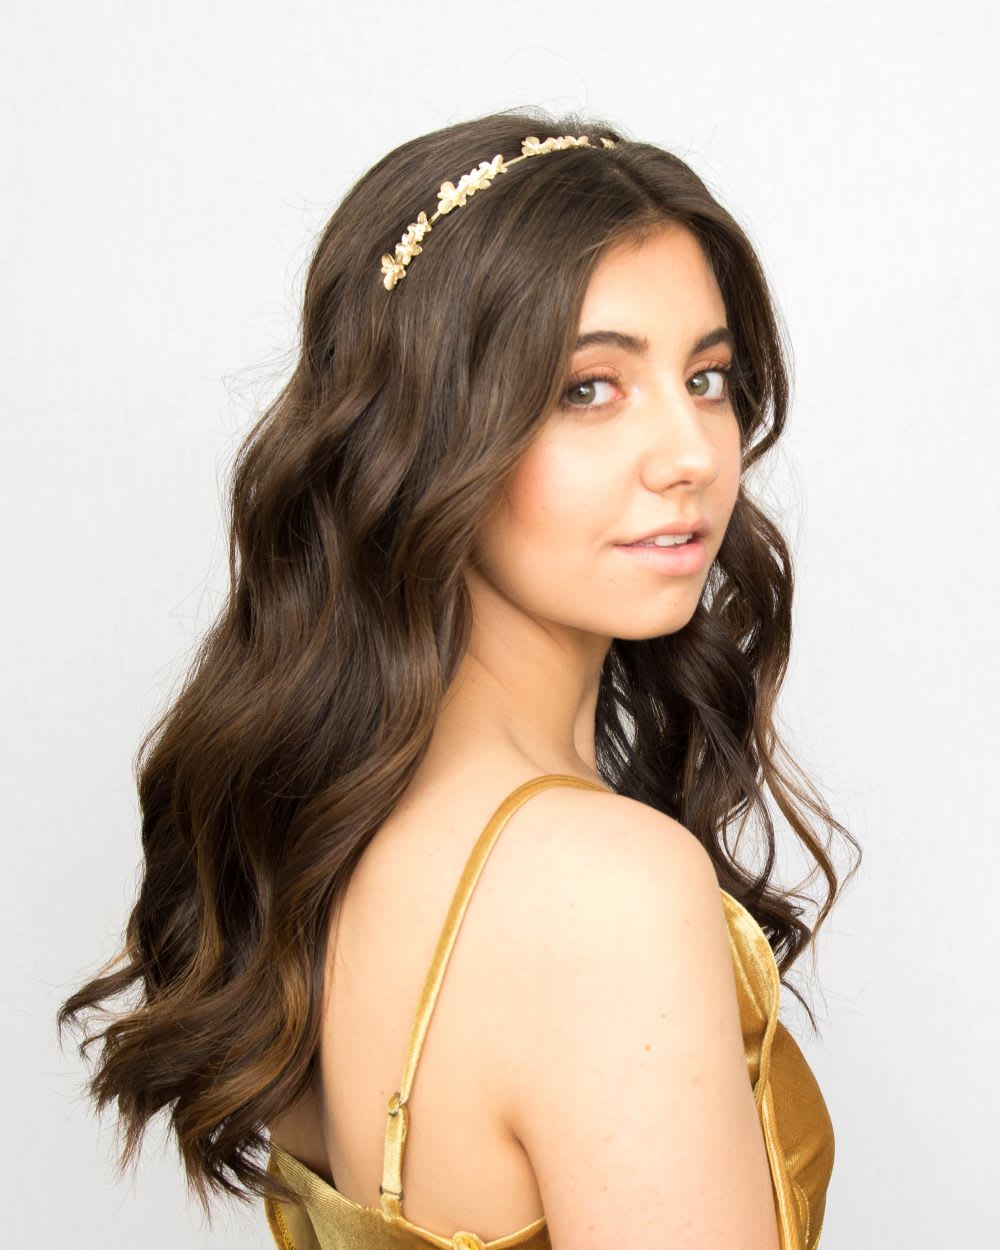 Headband Hairstyle With Romantic Waves: Holiday Hair Tutorial   Fashion Blog